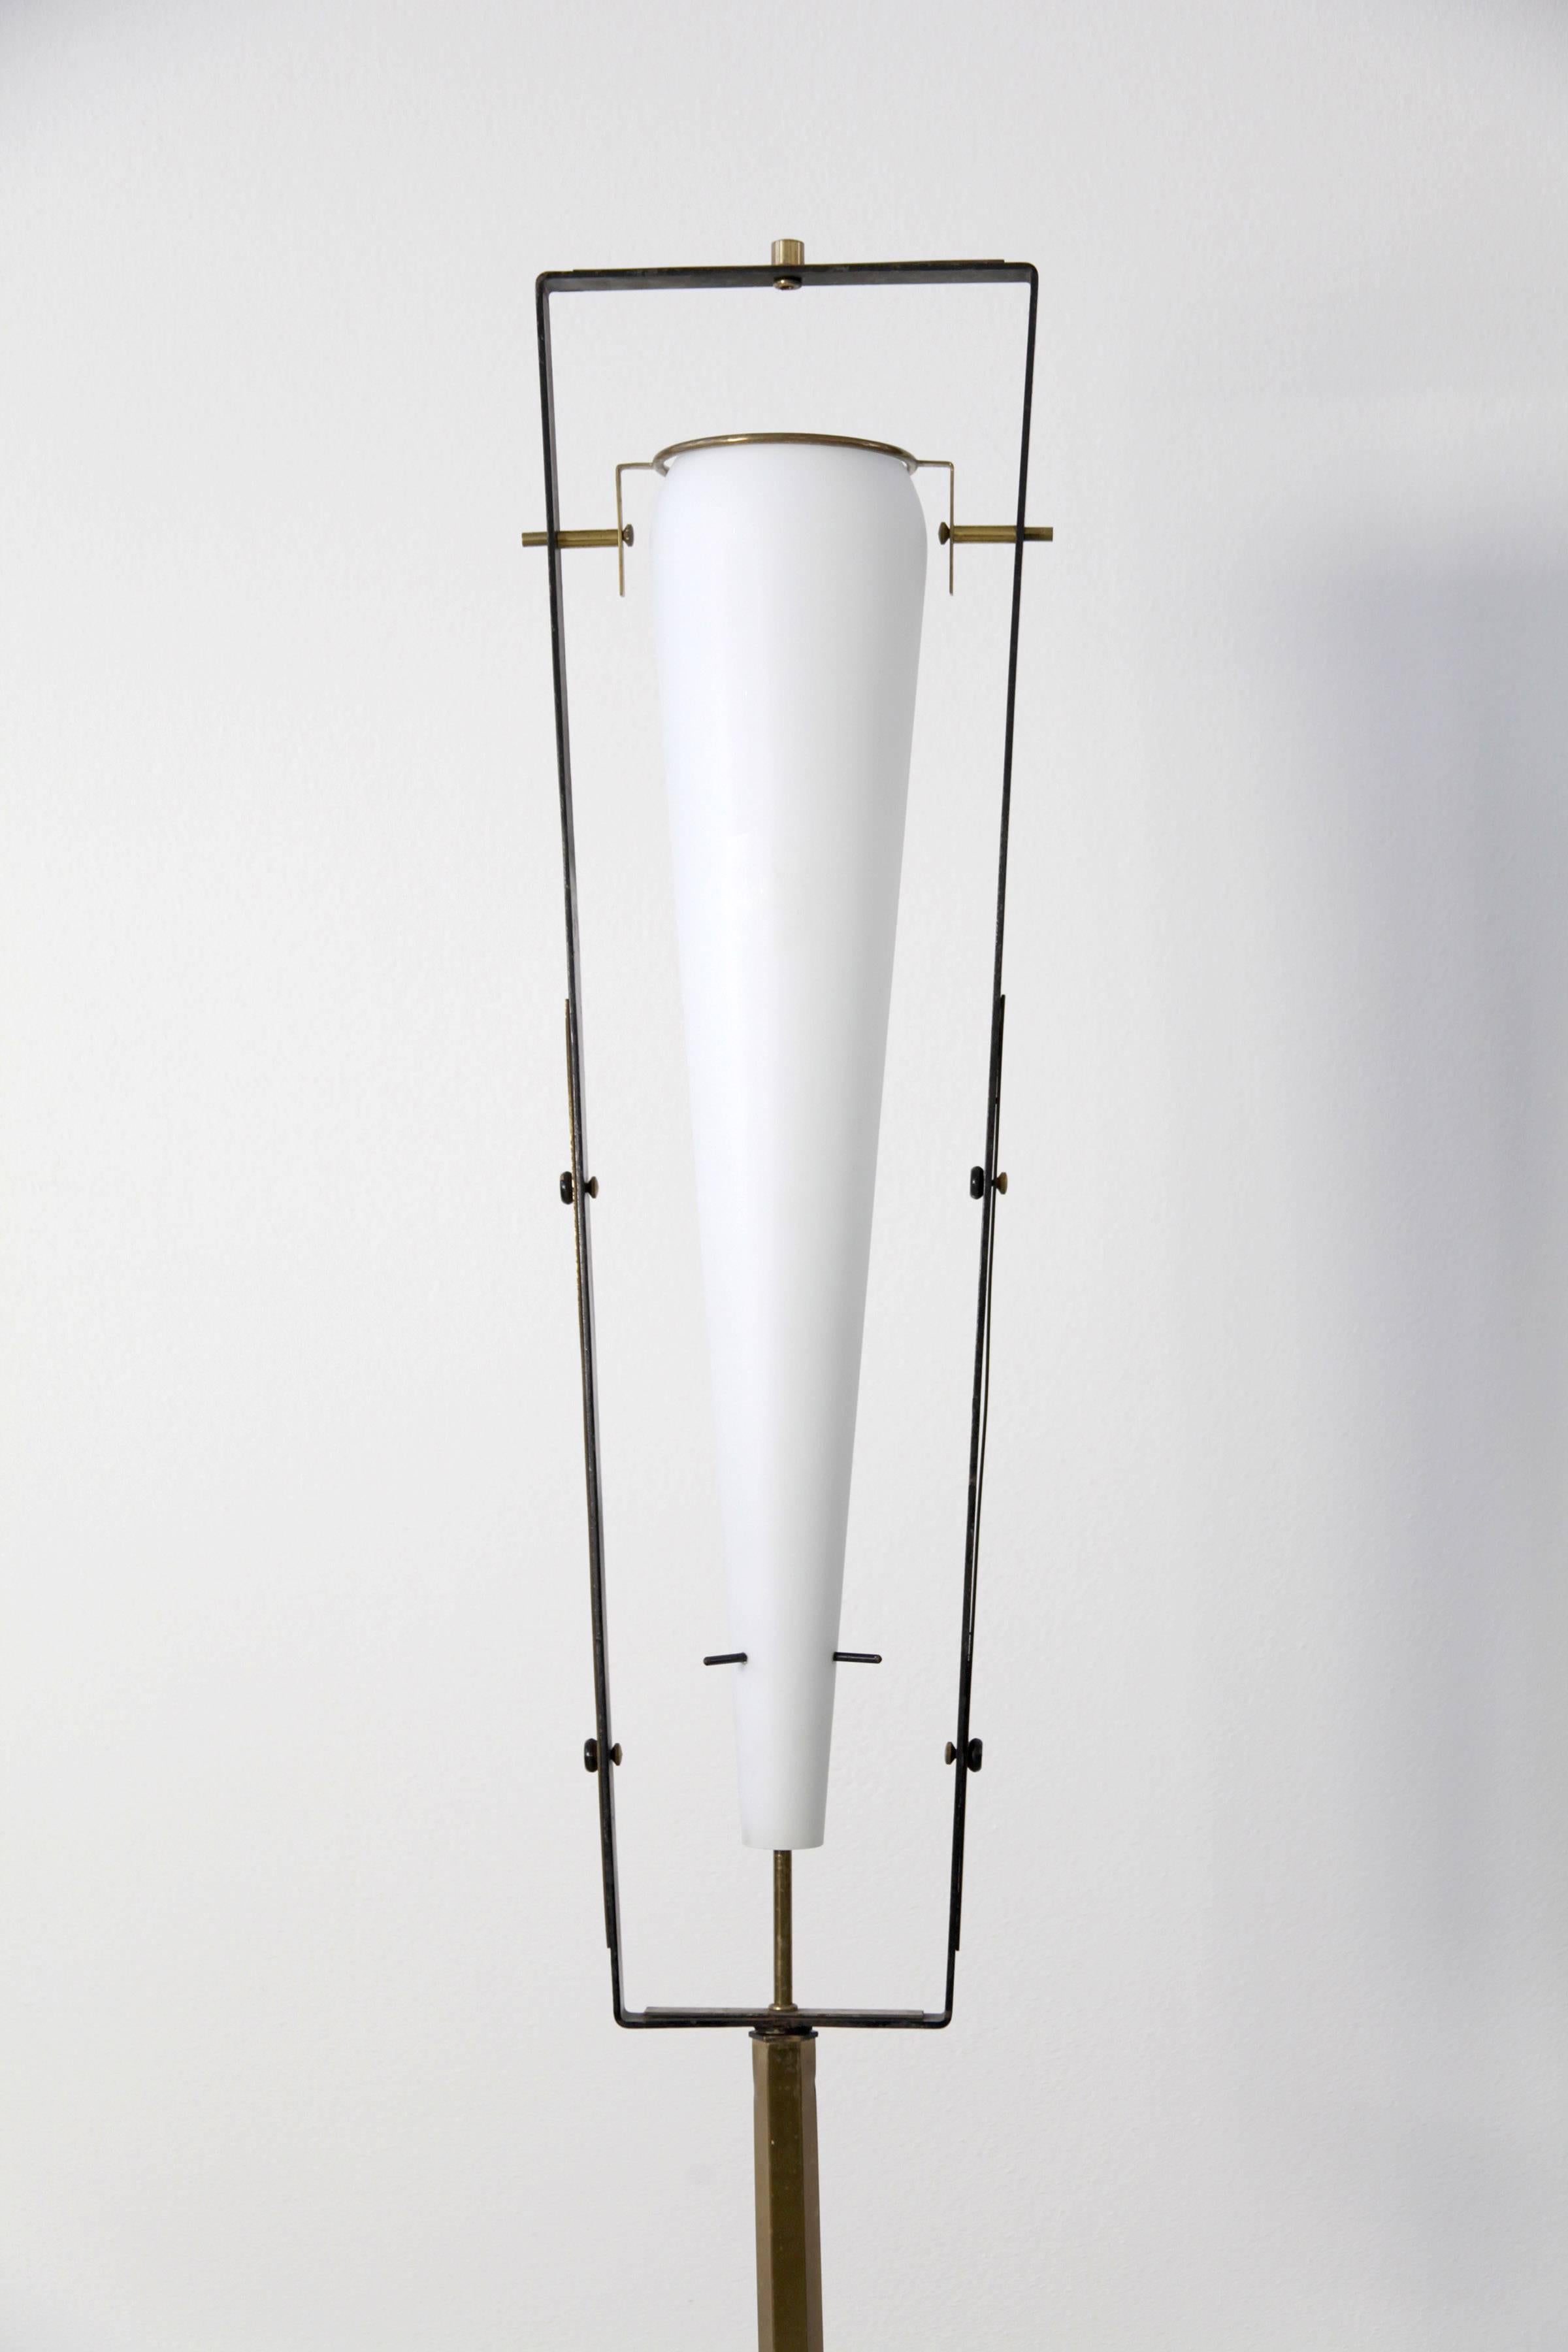 Gilardi & Barzaghi Italian Floor Brass Lamp with Satinated Glass Shade, 1950s For Sale 1